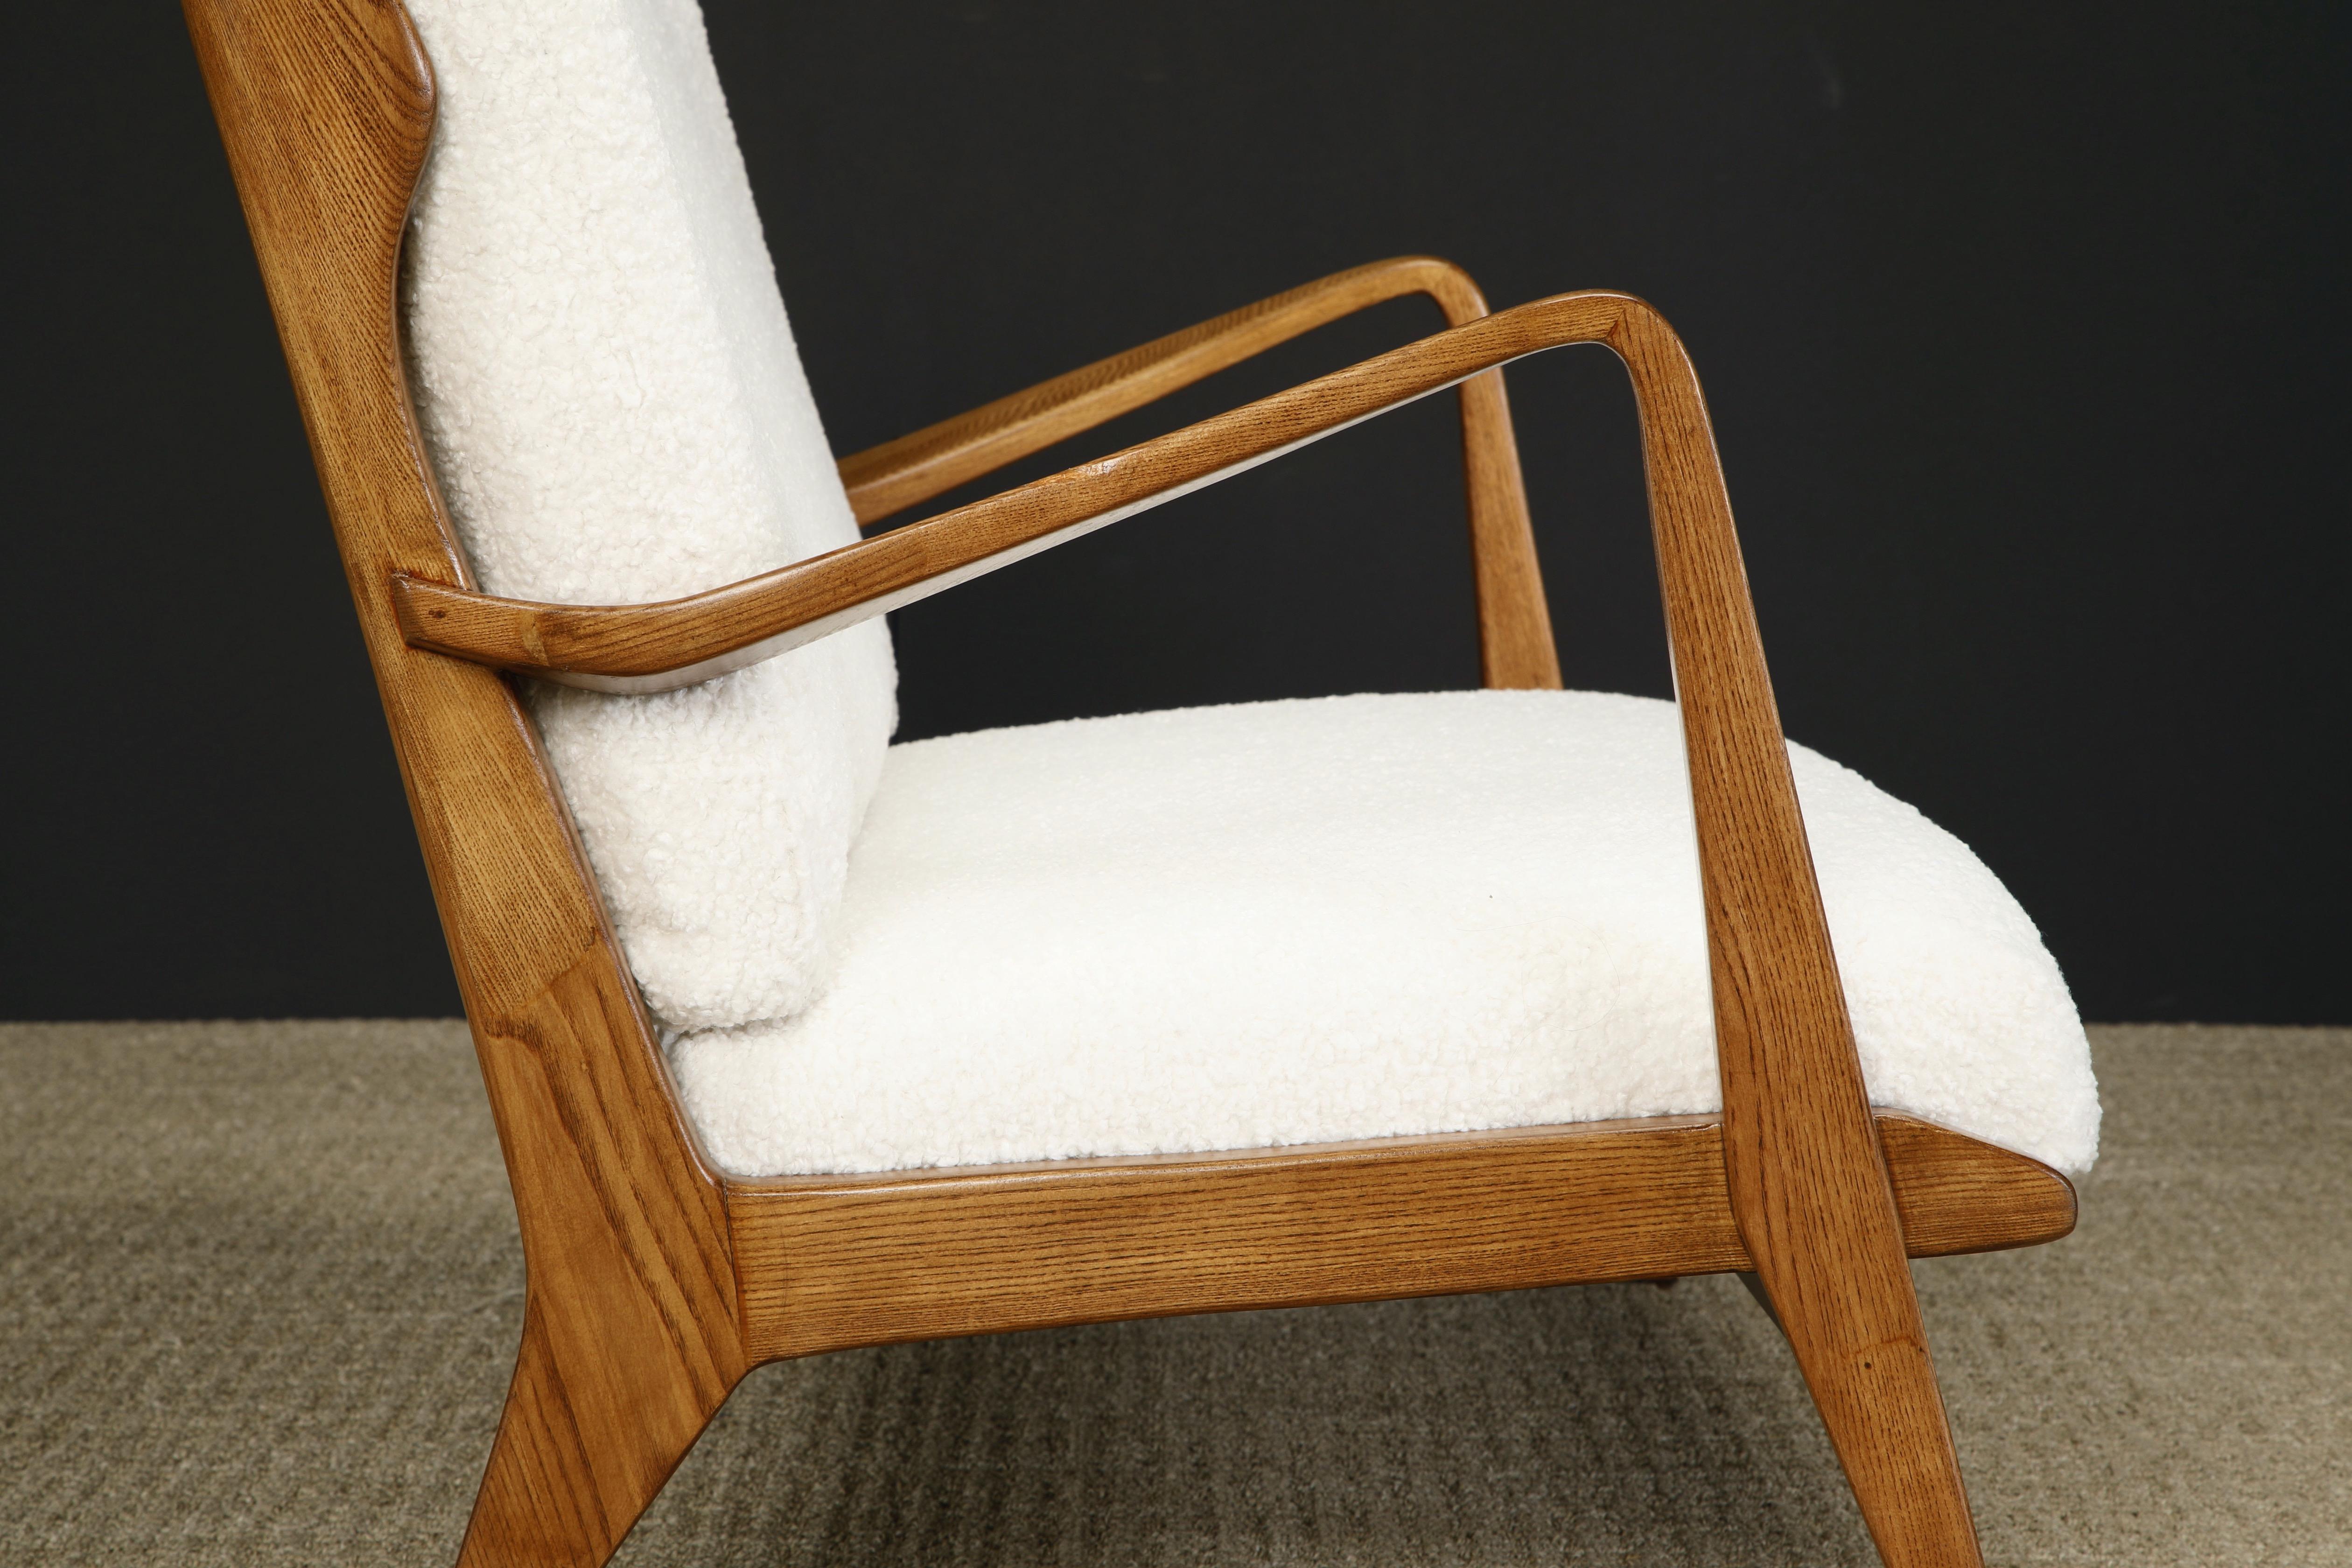 Rare Settee by Gio Ponti for Cassina, Refinished and Reupholstered, Italy 1950s For Sale 2